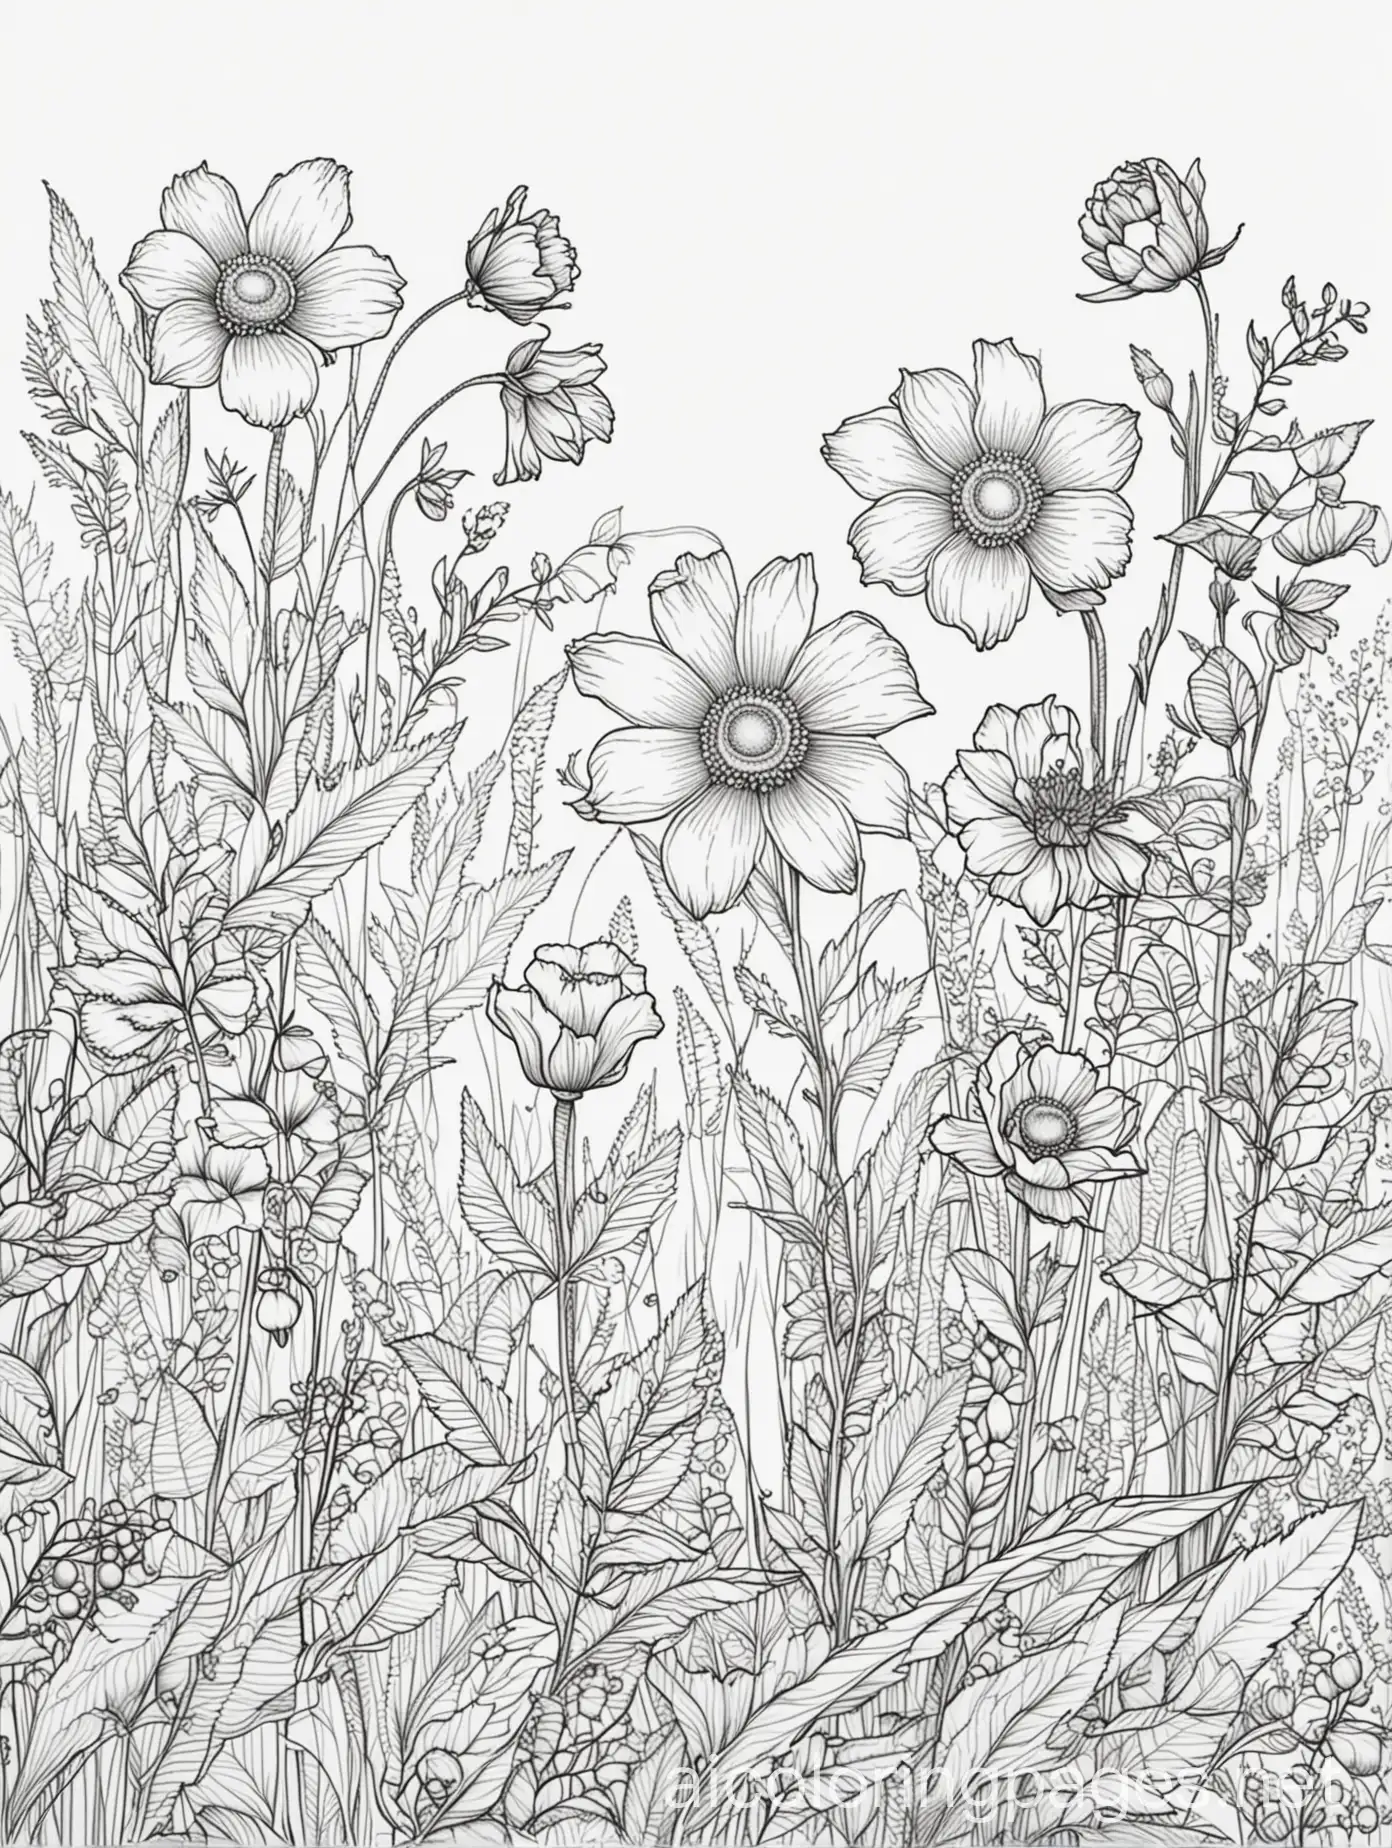 Adorable-Wildflowers-Coloring-Page-Simple-Line-Art-for-Kids